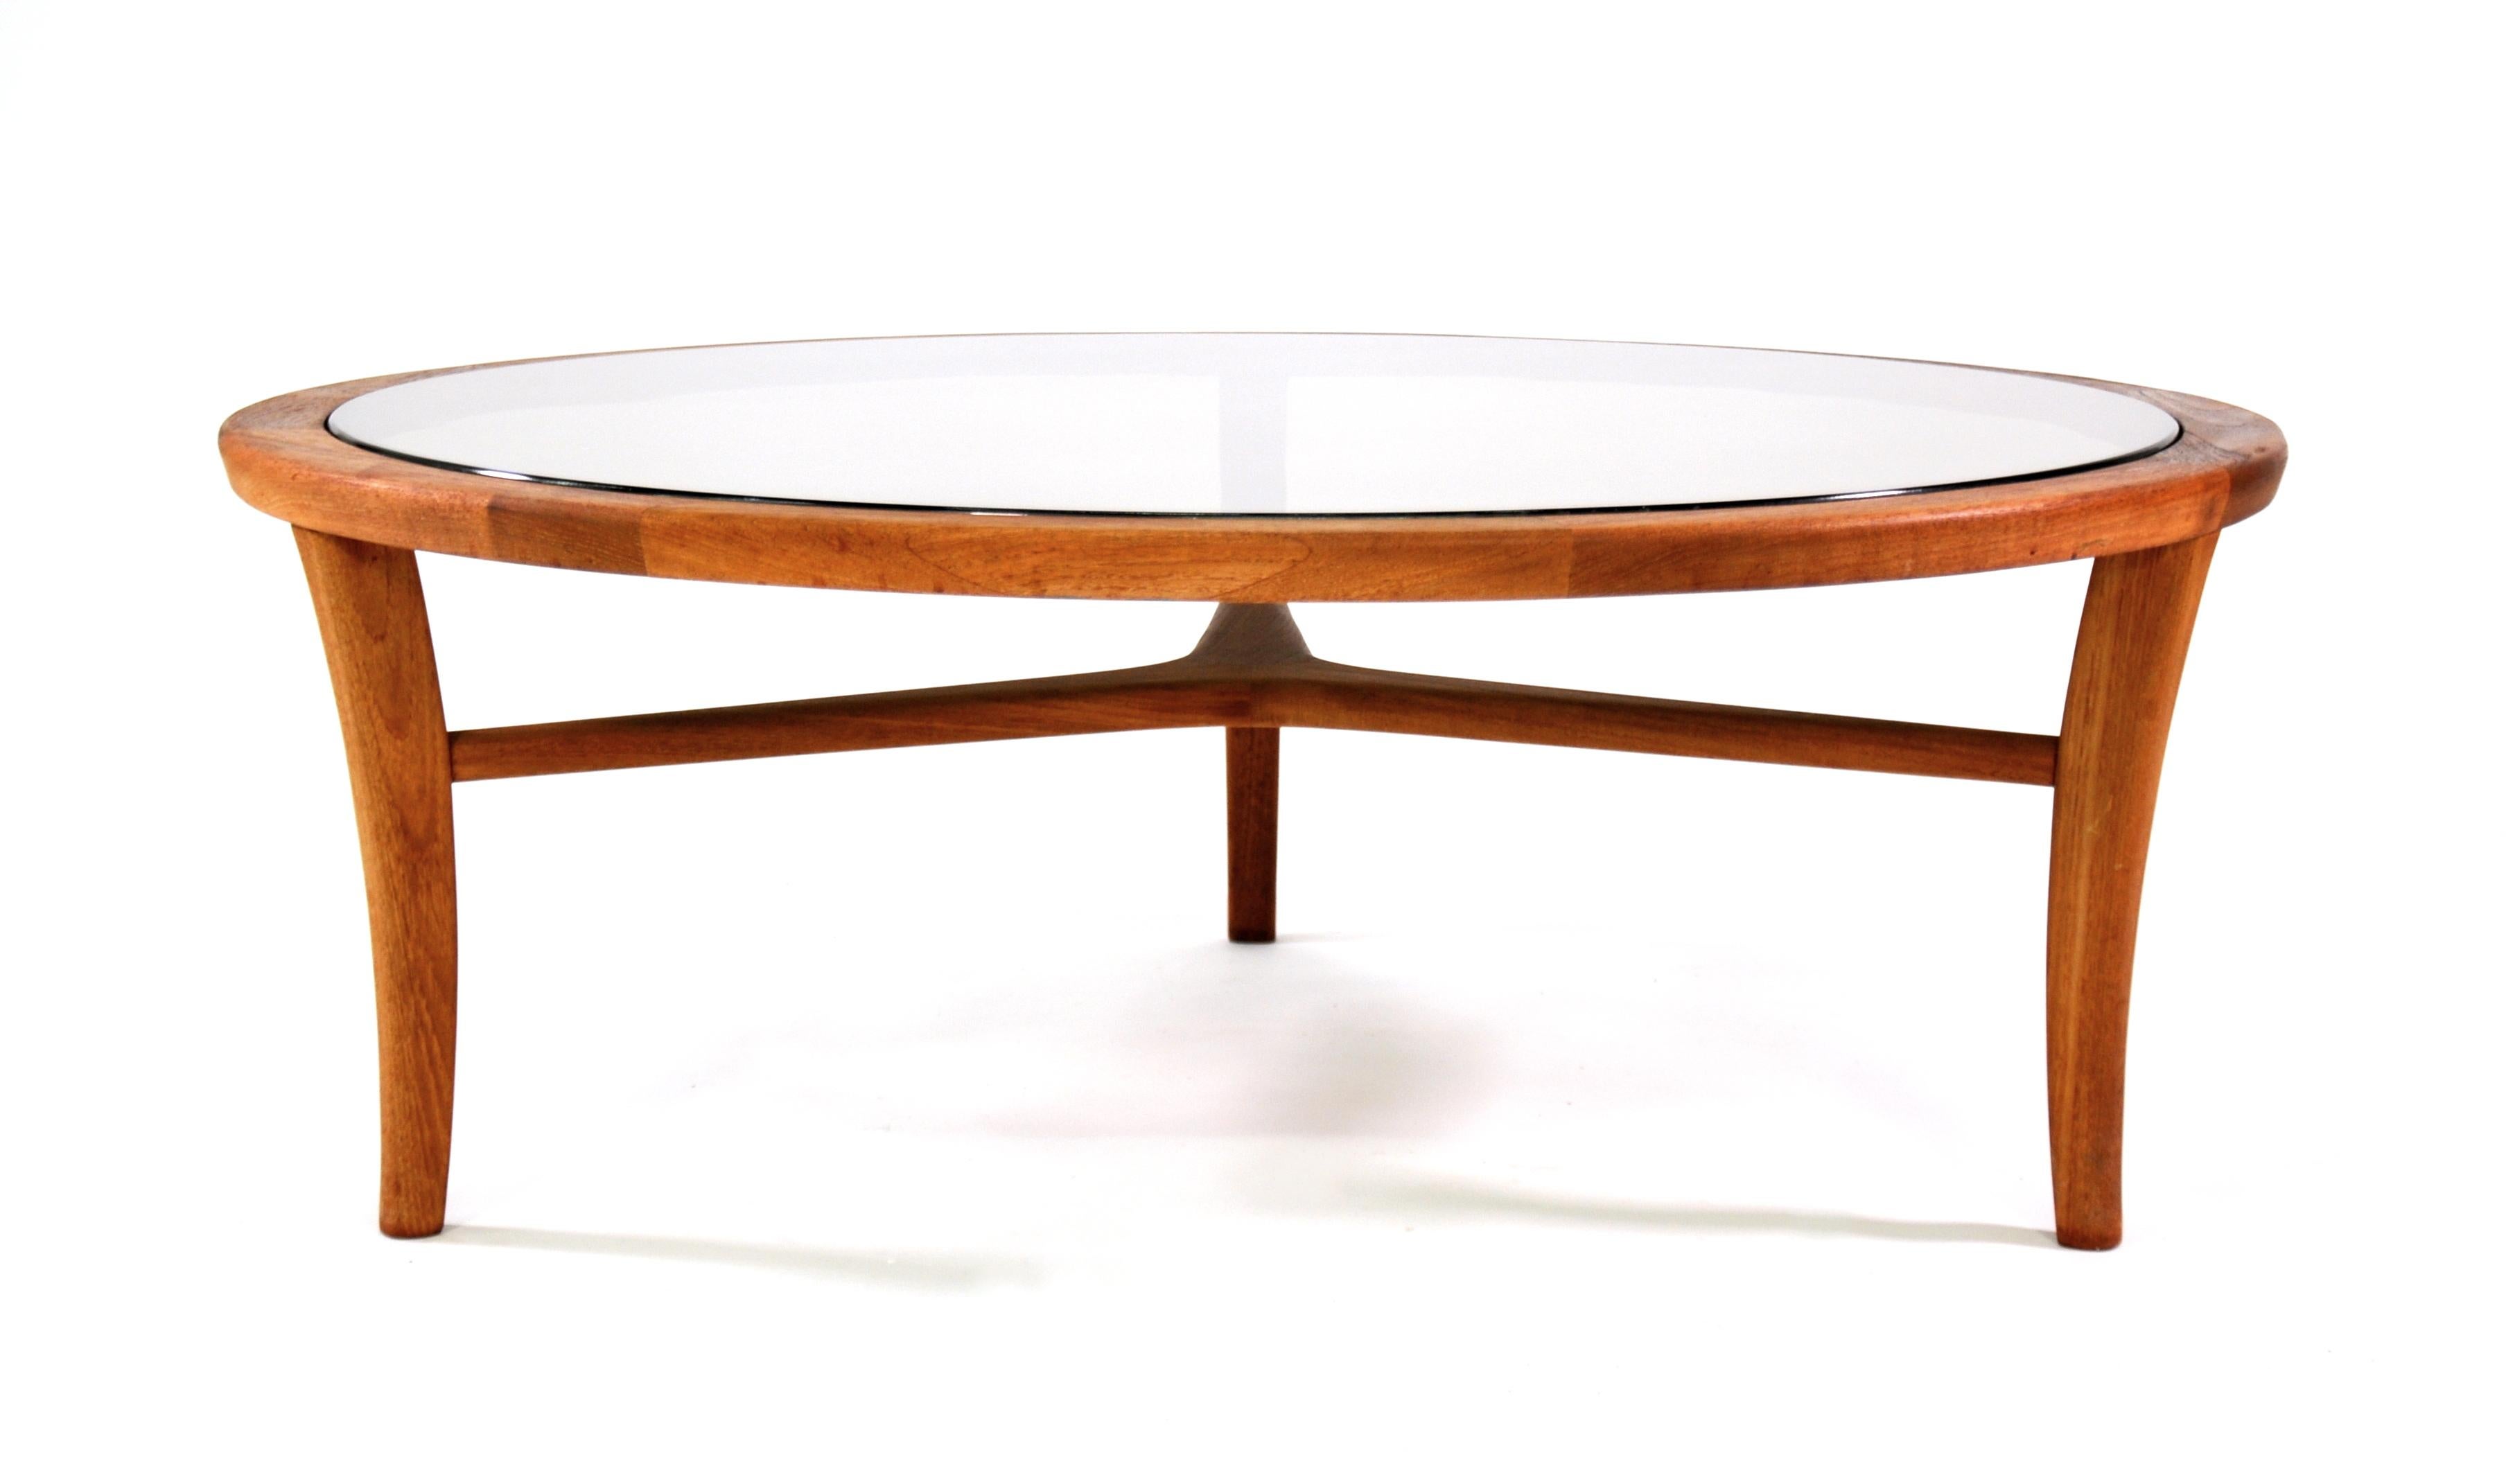 A vintage round cocktail table featuring a solid teak frame with an inset smoked glass top, dating from the 1970s. A pretty Scandinavian design that works well with Mid-Century Modern, eclectic or traditional interiors.